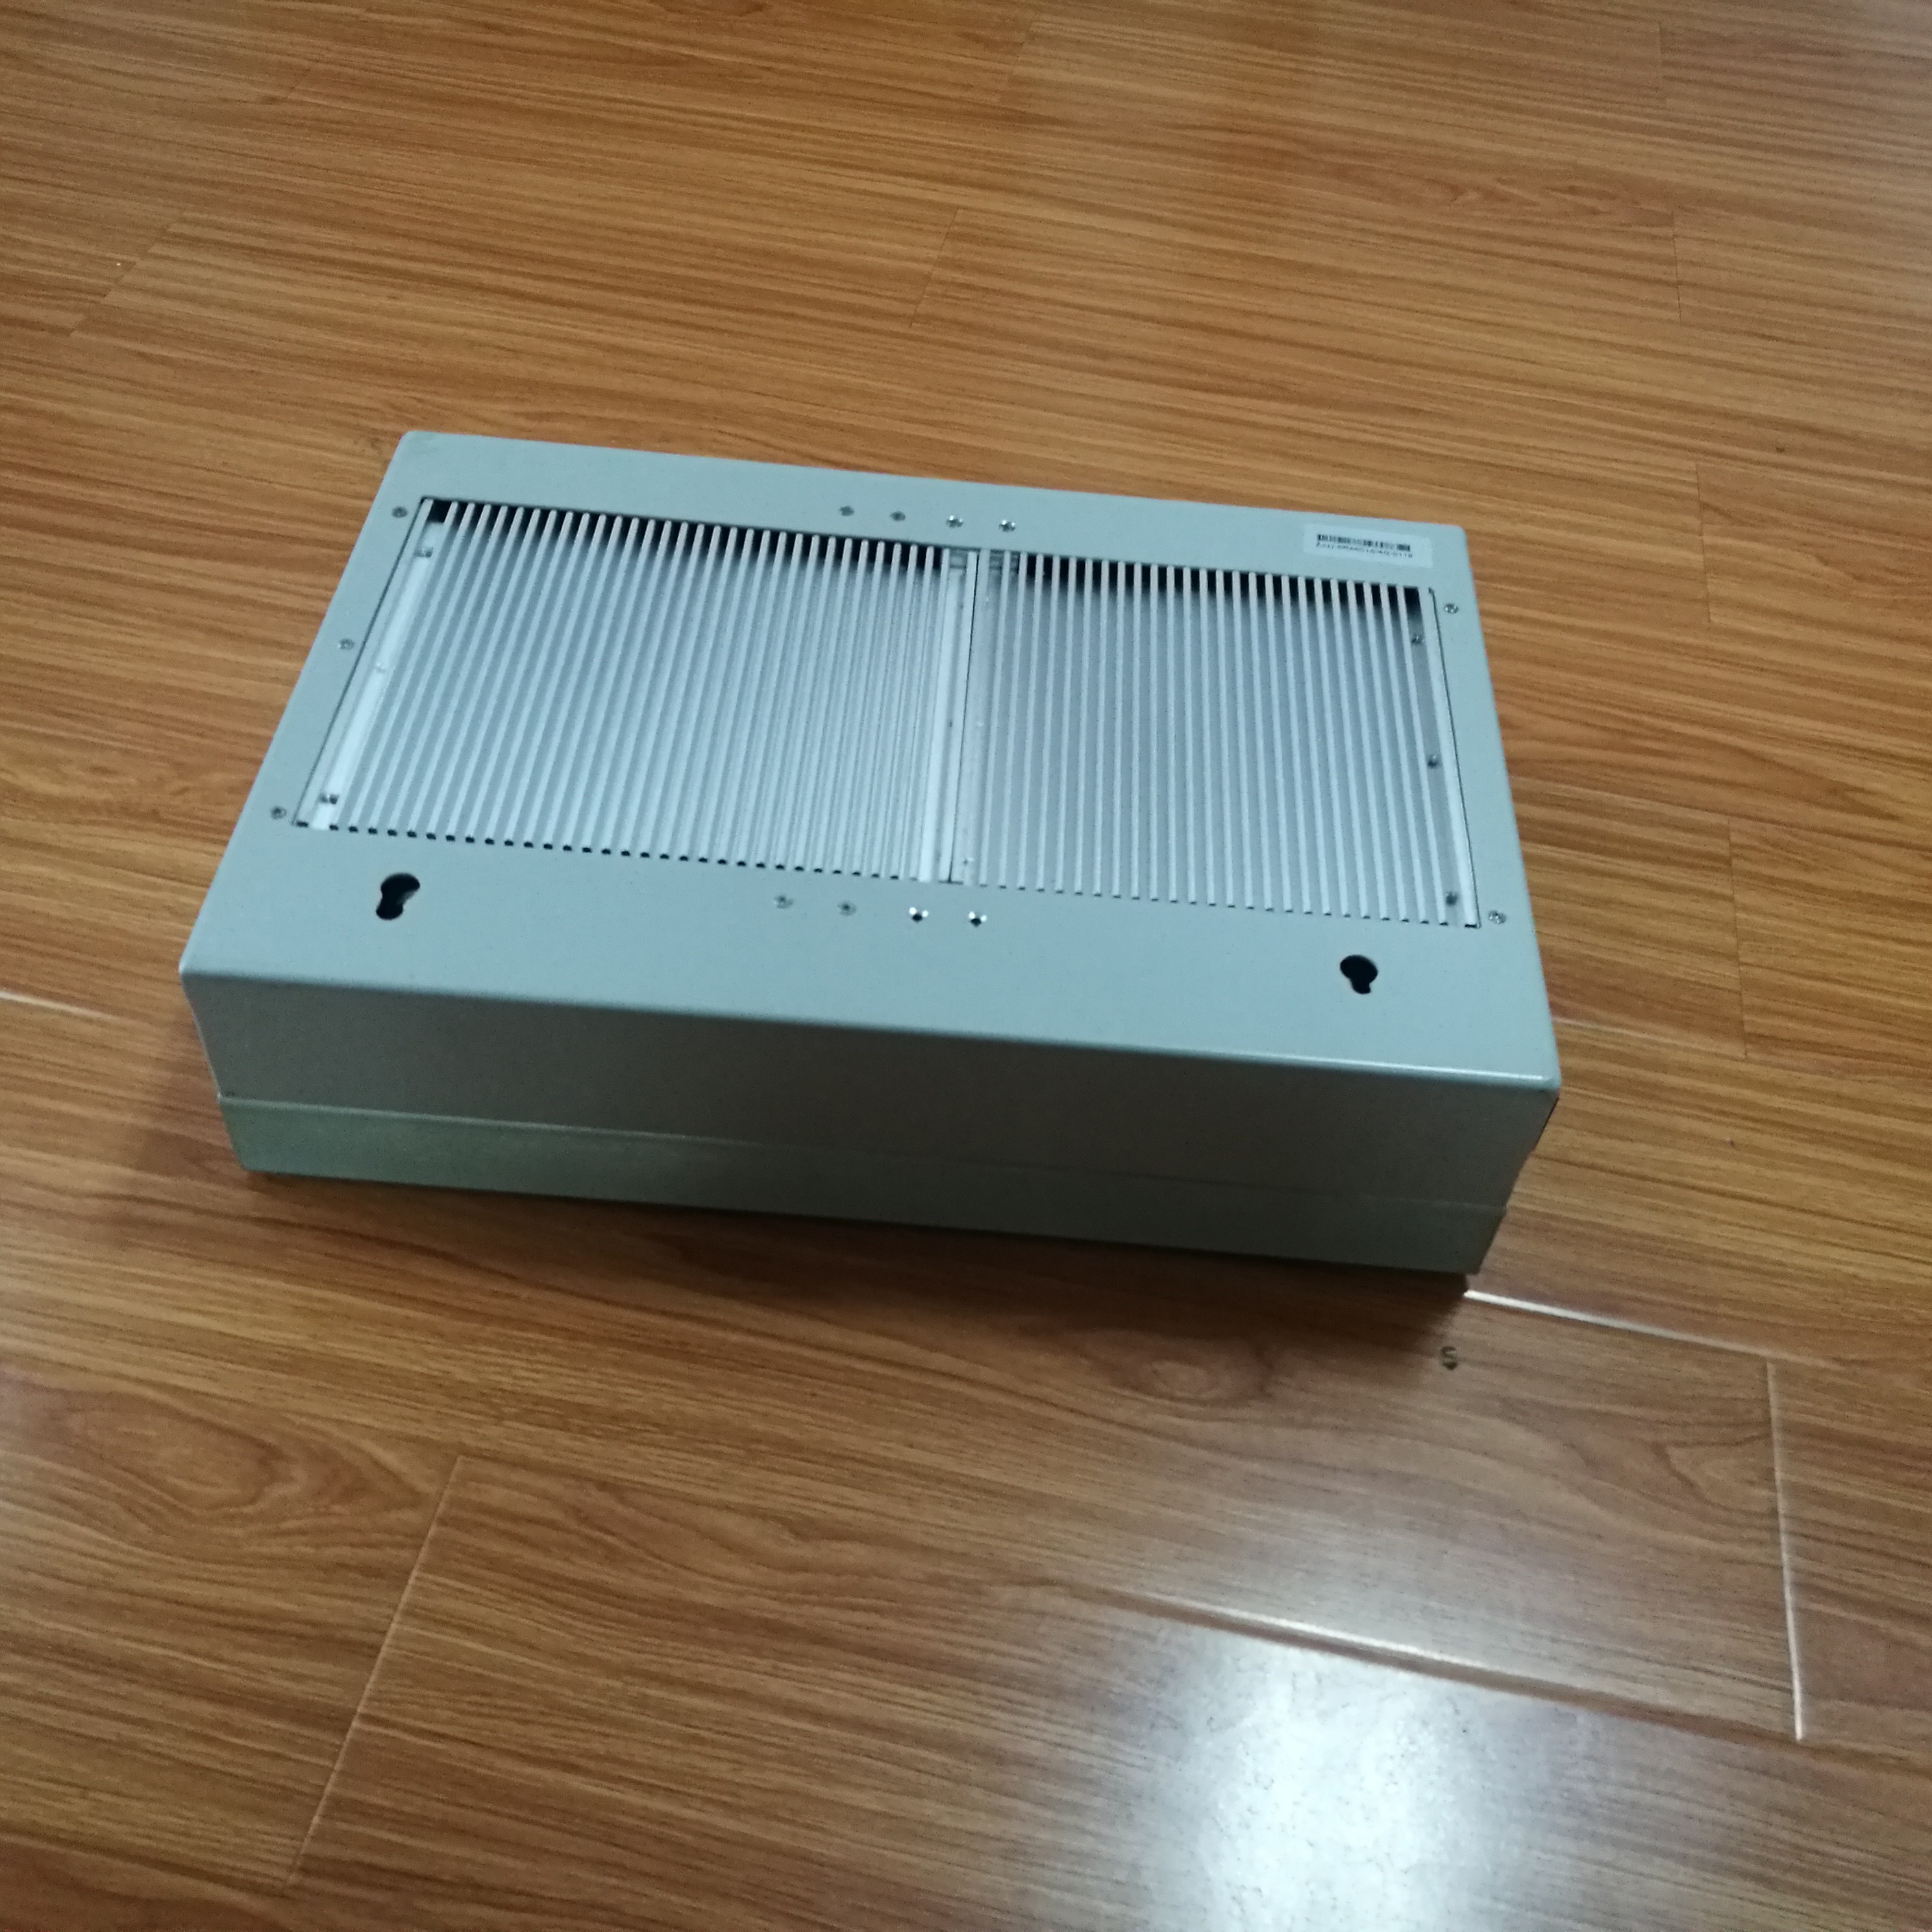 Wholesale 220VAC Mobile Phone Blocker Jammer 1W RF Power 418X280X108 Dimension from china suppliers